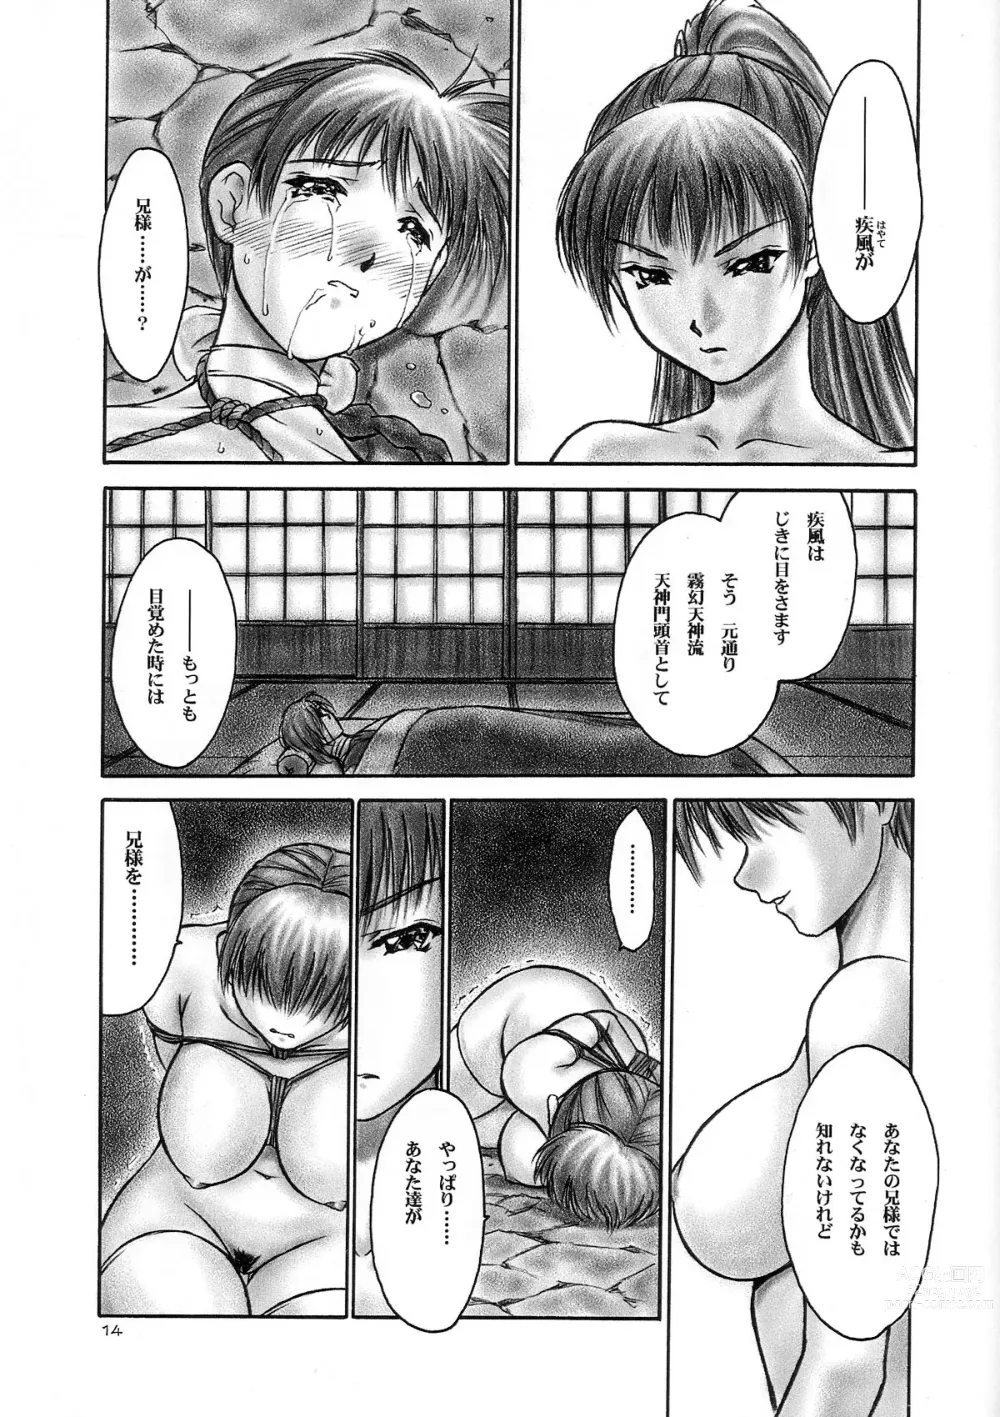 Page 13 of doujinshi INU/Sequel (decensored)